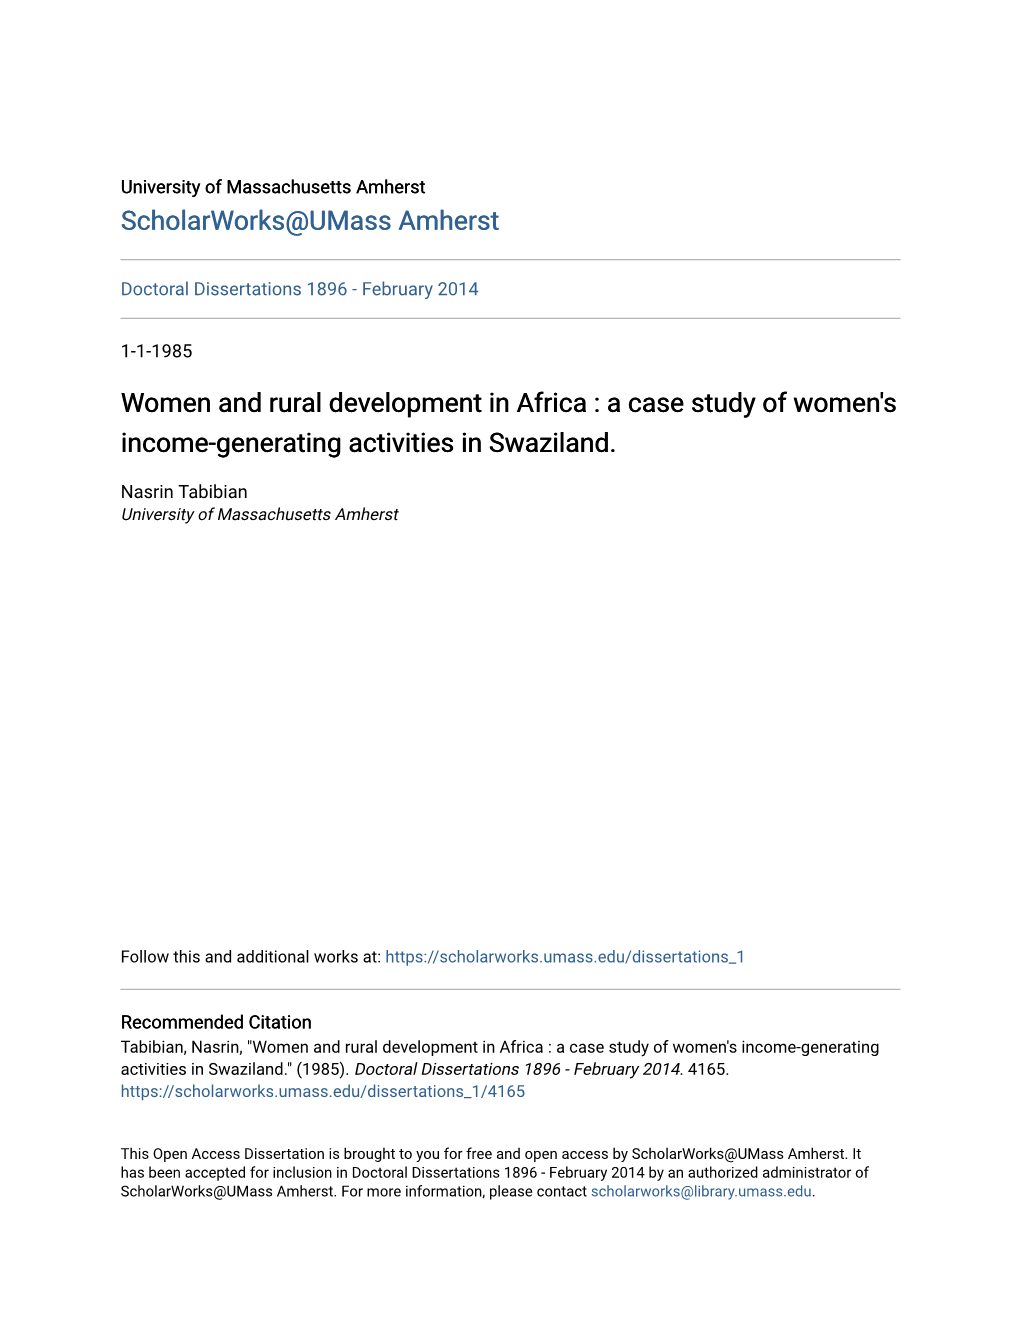 A Case Study of Women's Income-Generating Activities in Swaziland